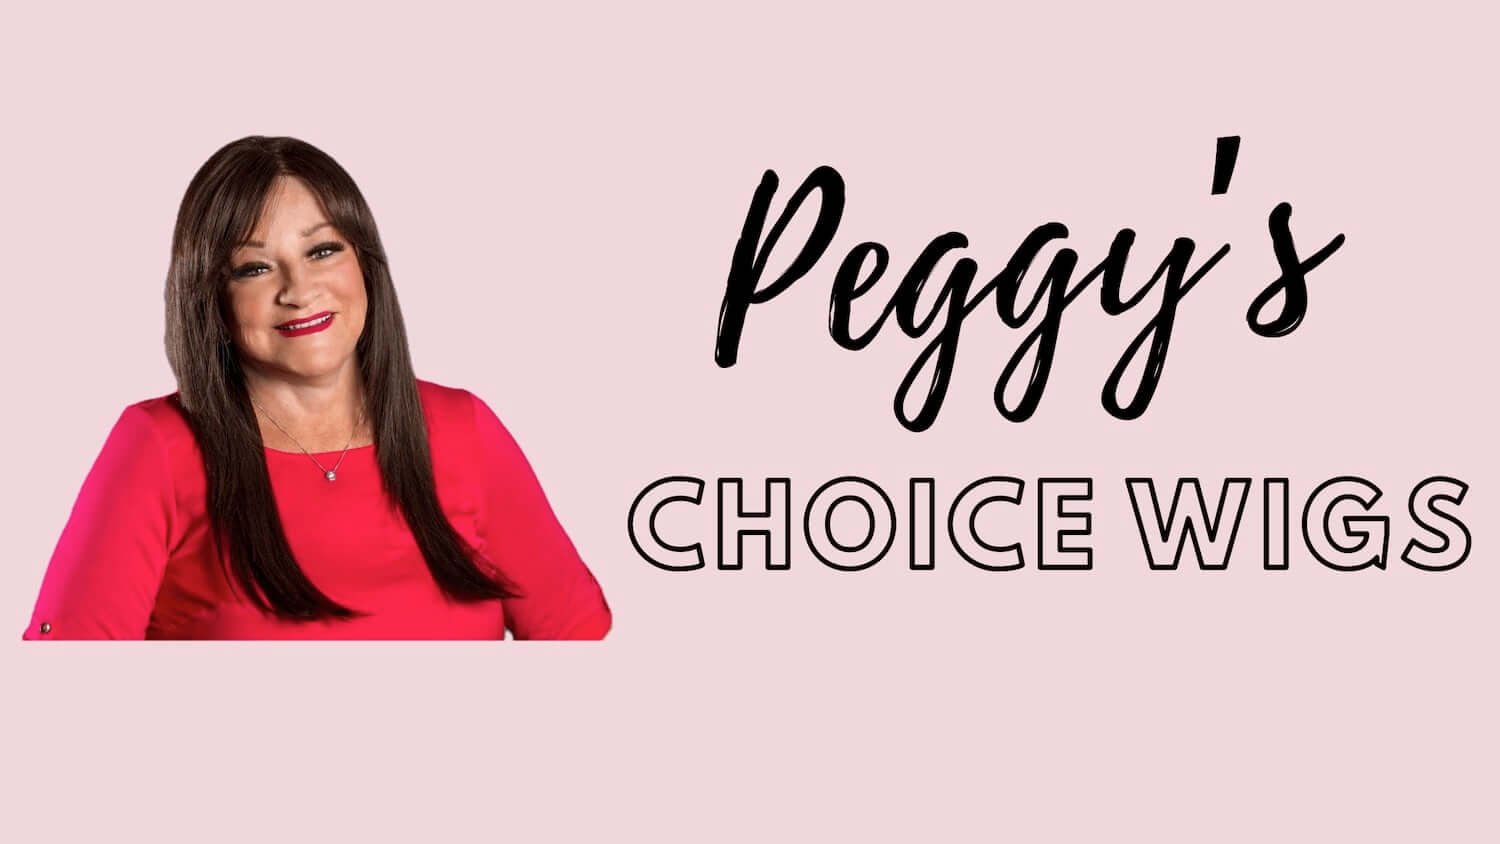 Peggy's Choice Wigs